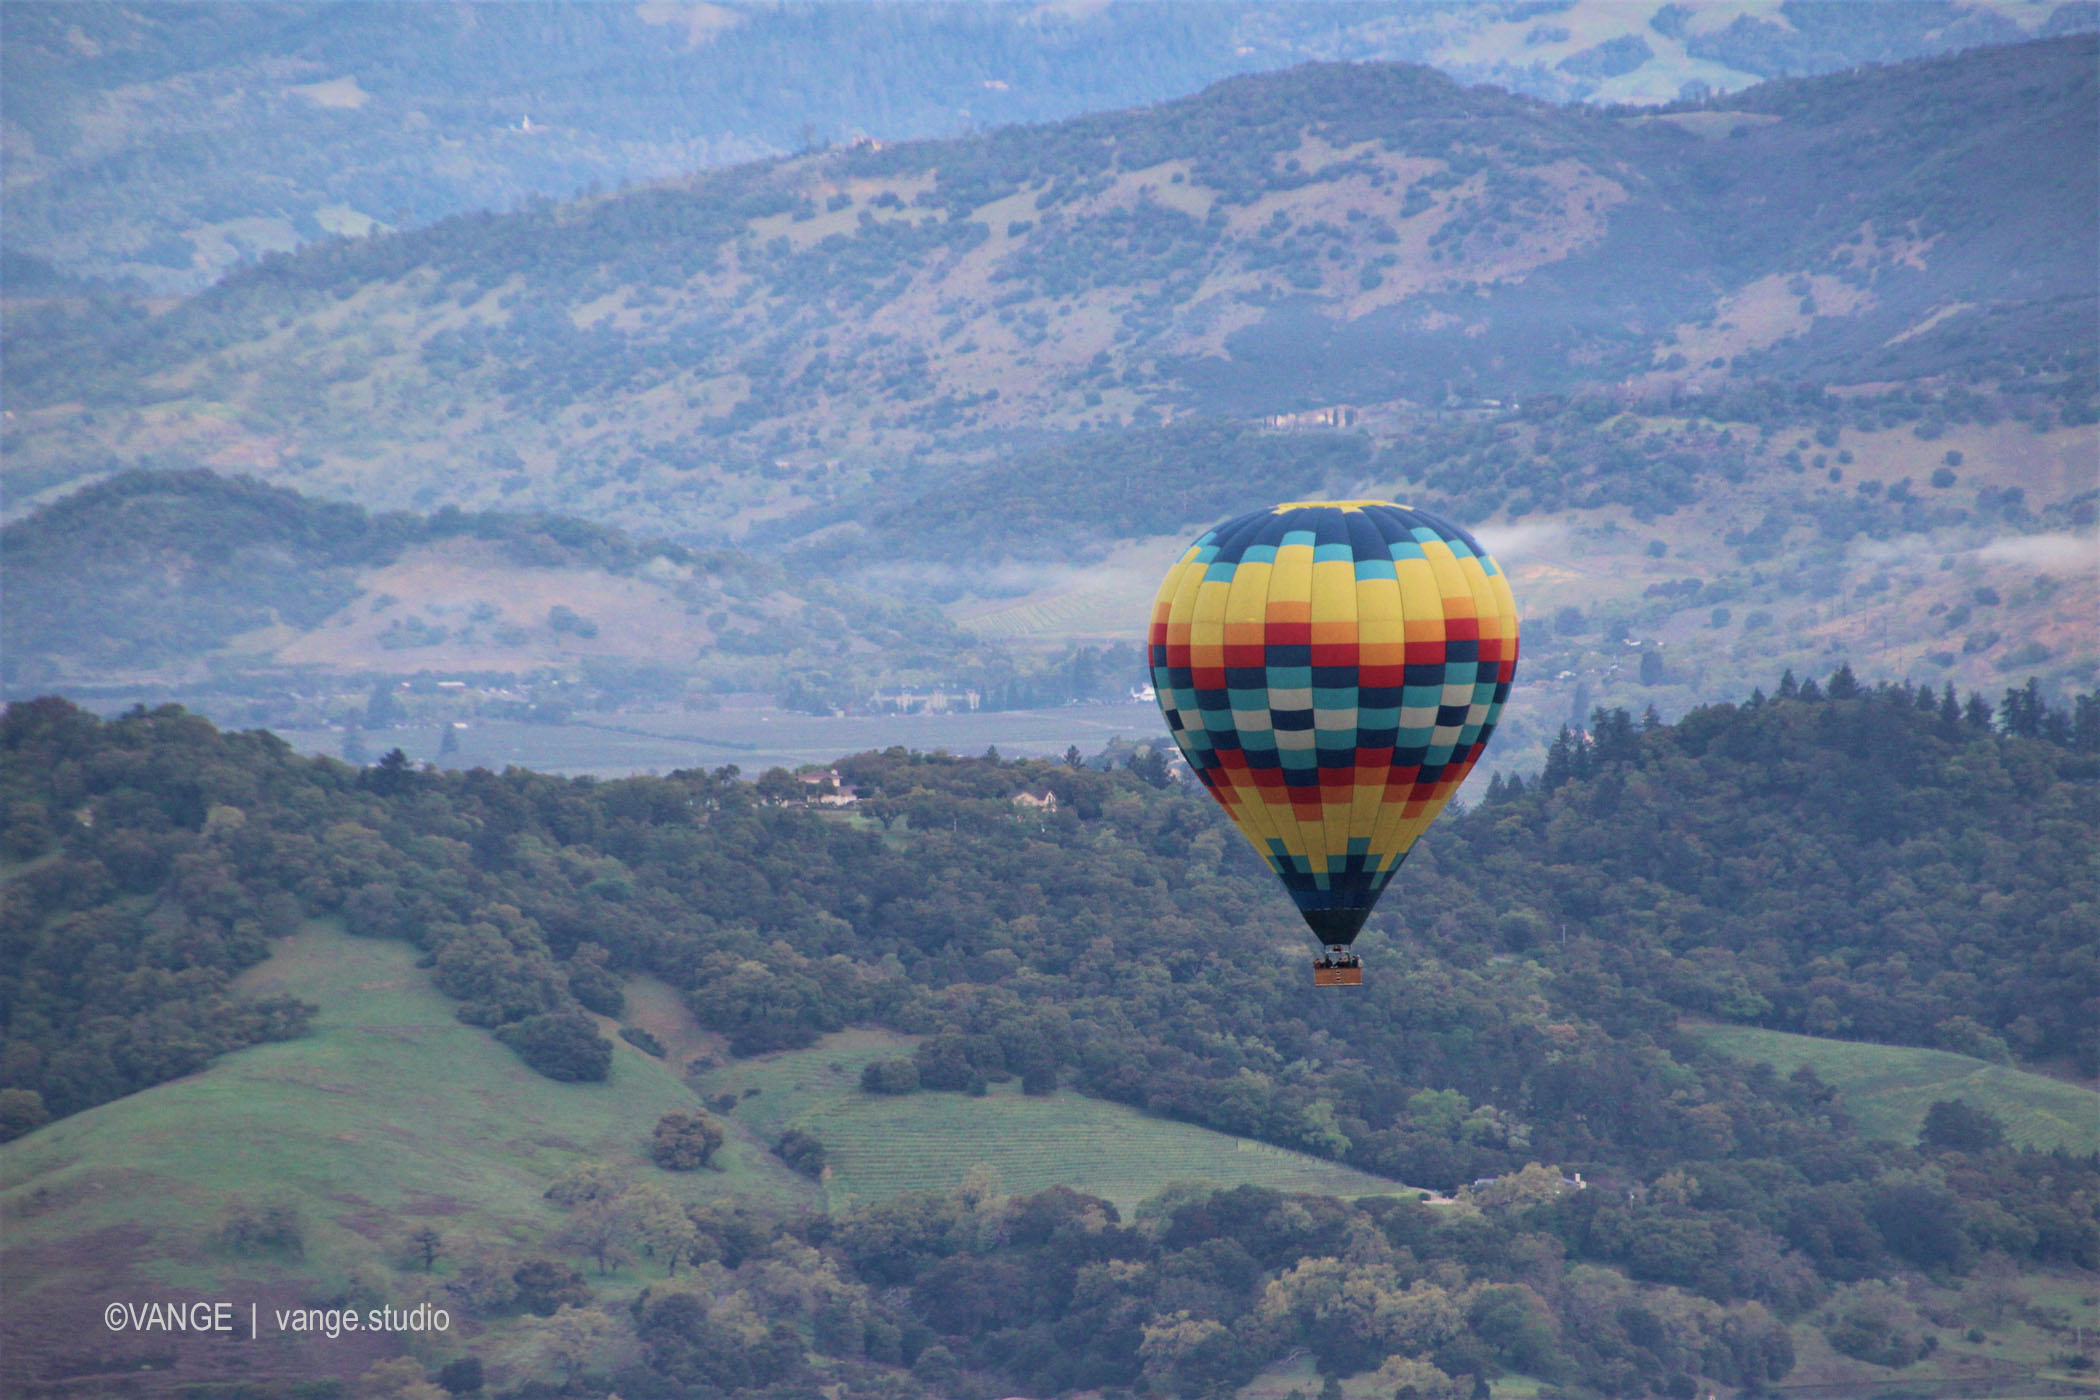 Balloon Ride by Vange over Napa Valley